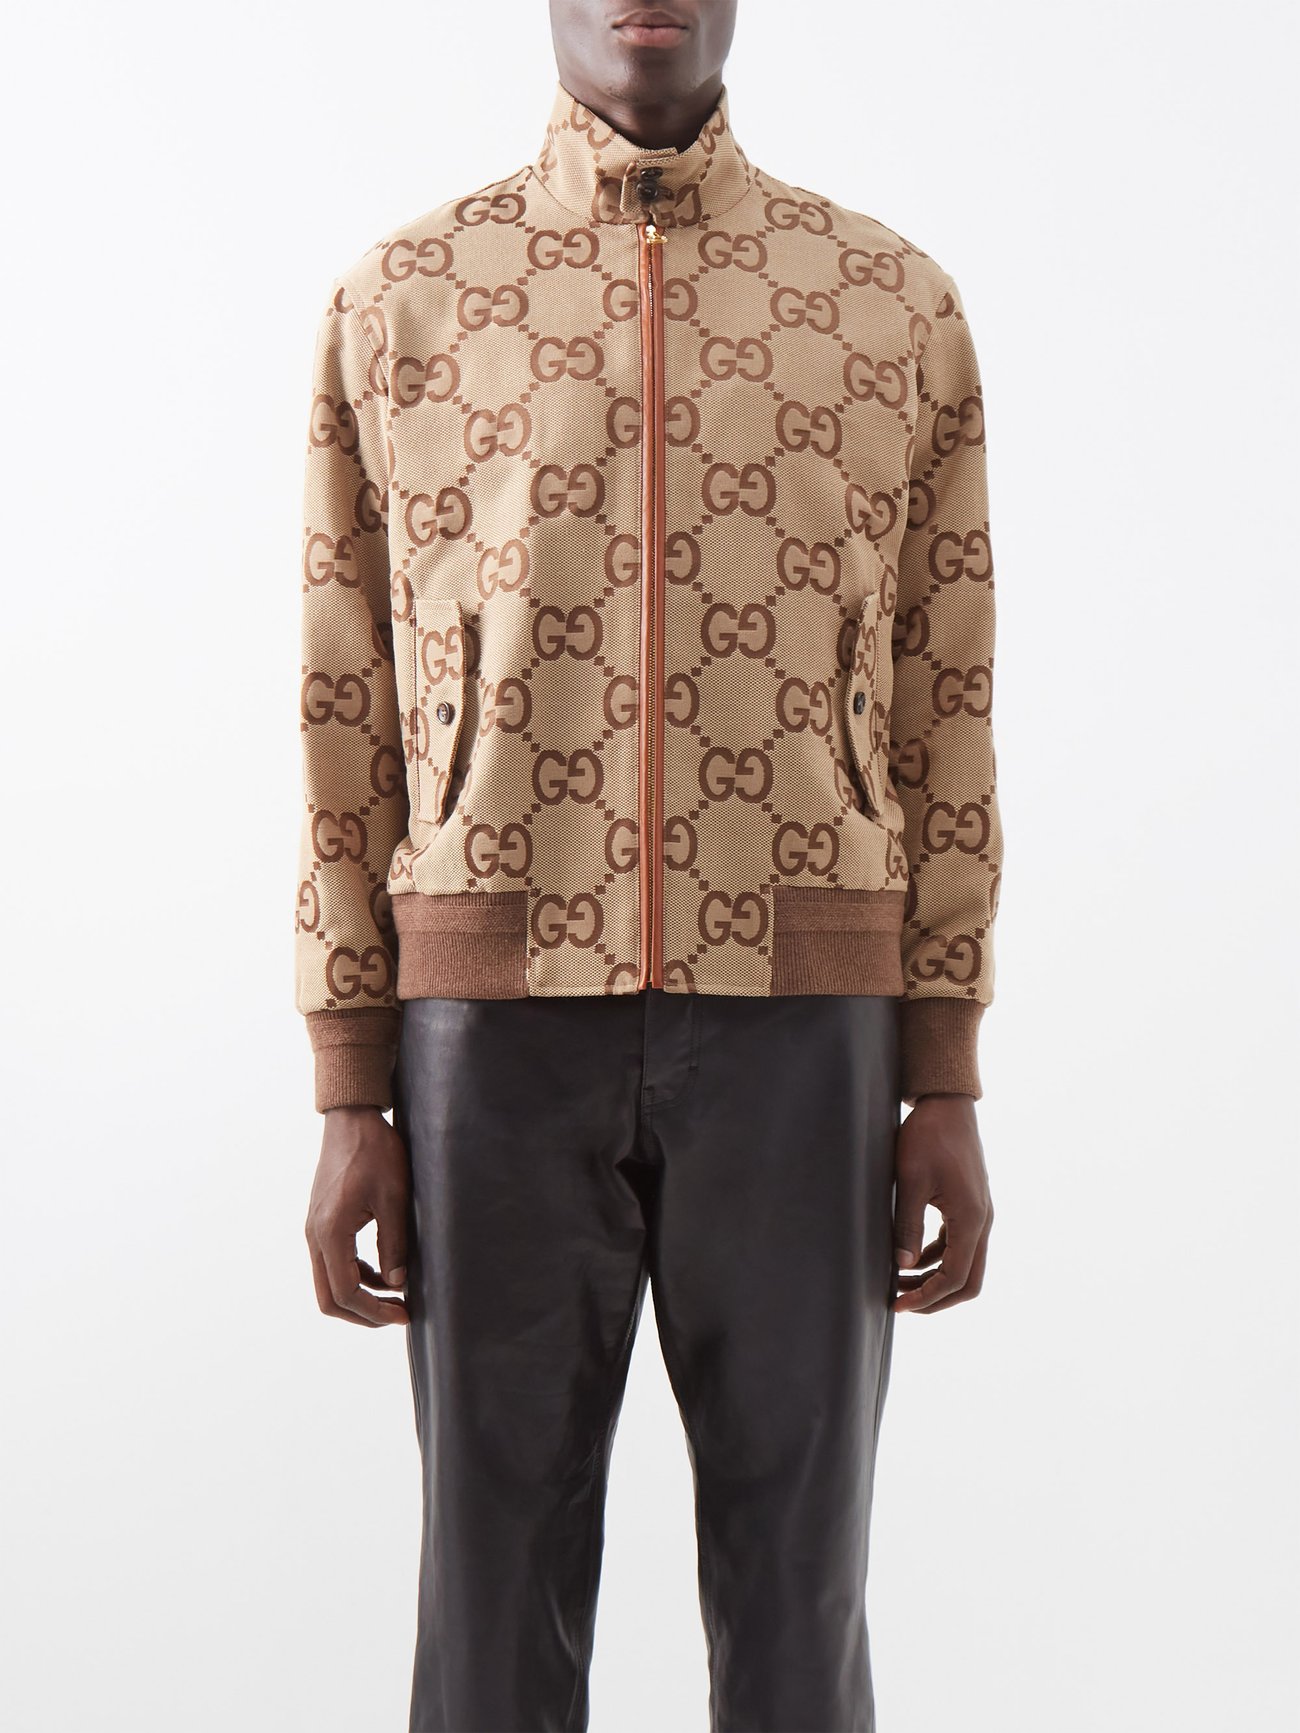 GG Supreme Canvas Bomber Jacket in Brown - Gucci